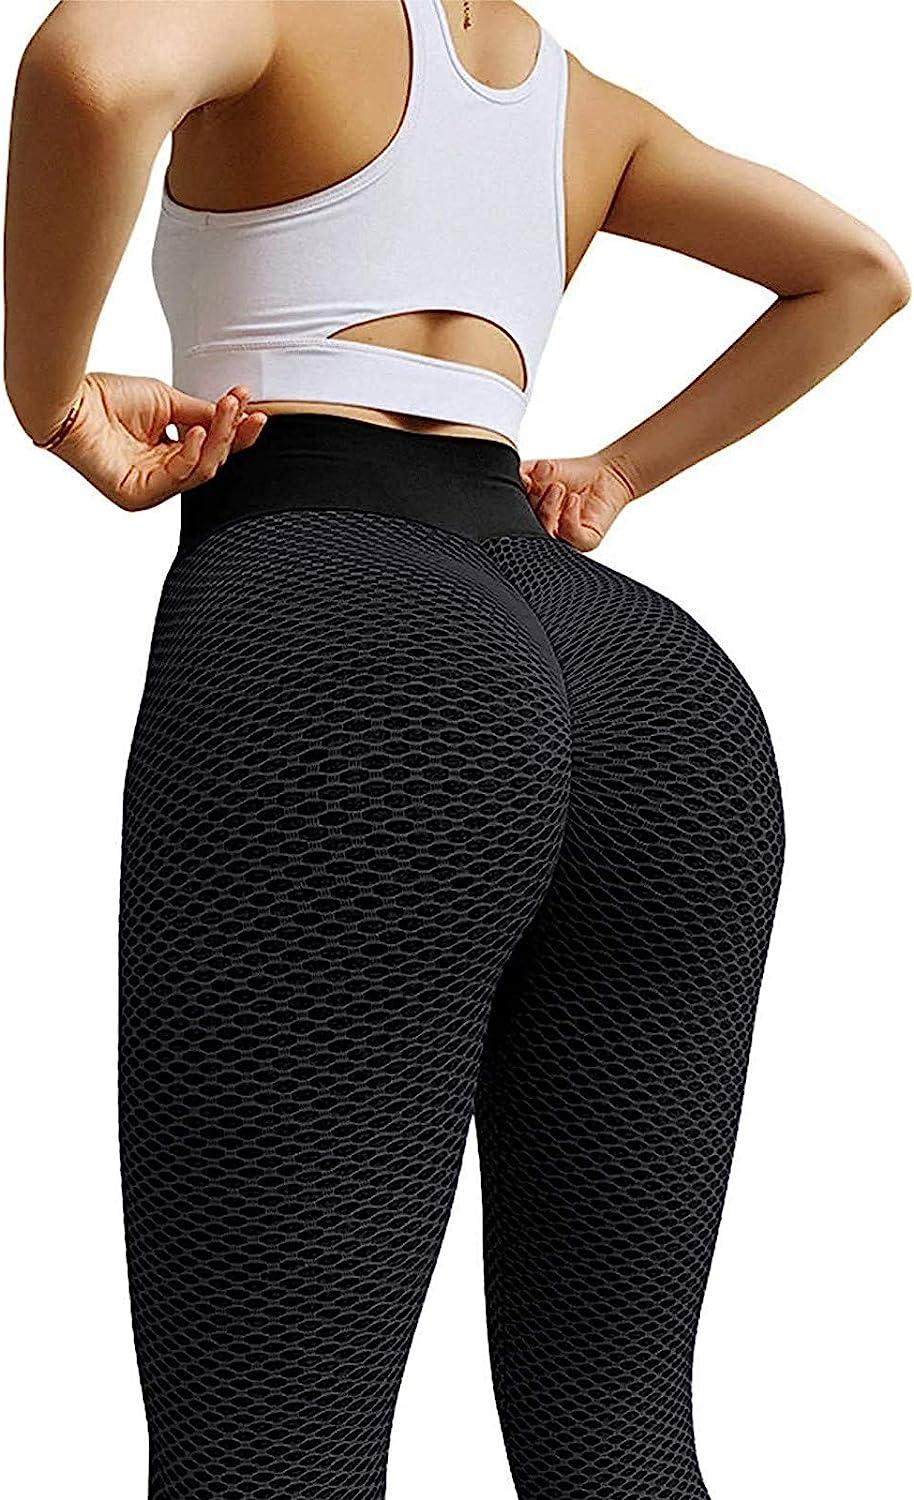 Winter Warm Sports Leggings Women High Waist Tights Gym Workout Yoga Pants  Push Up Fitness Sweatpants Running Stretch Trousers